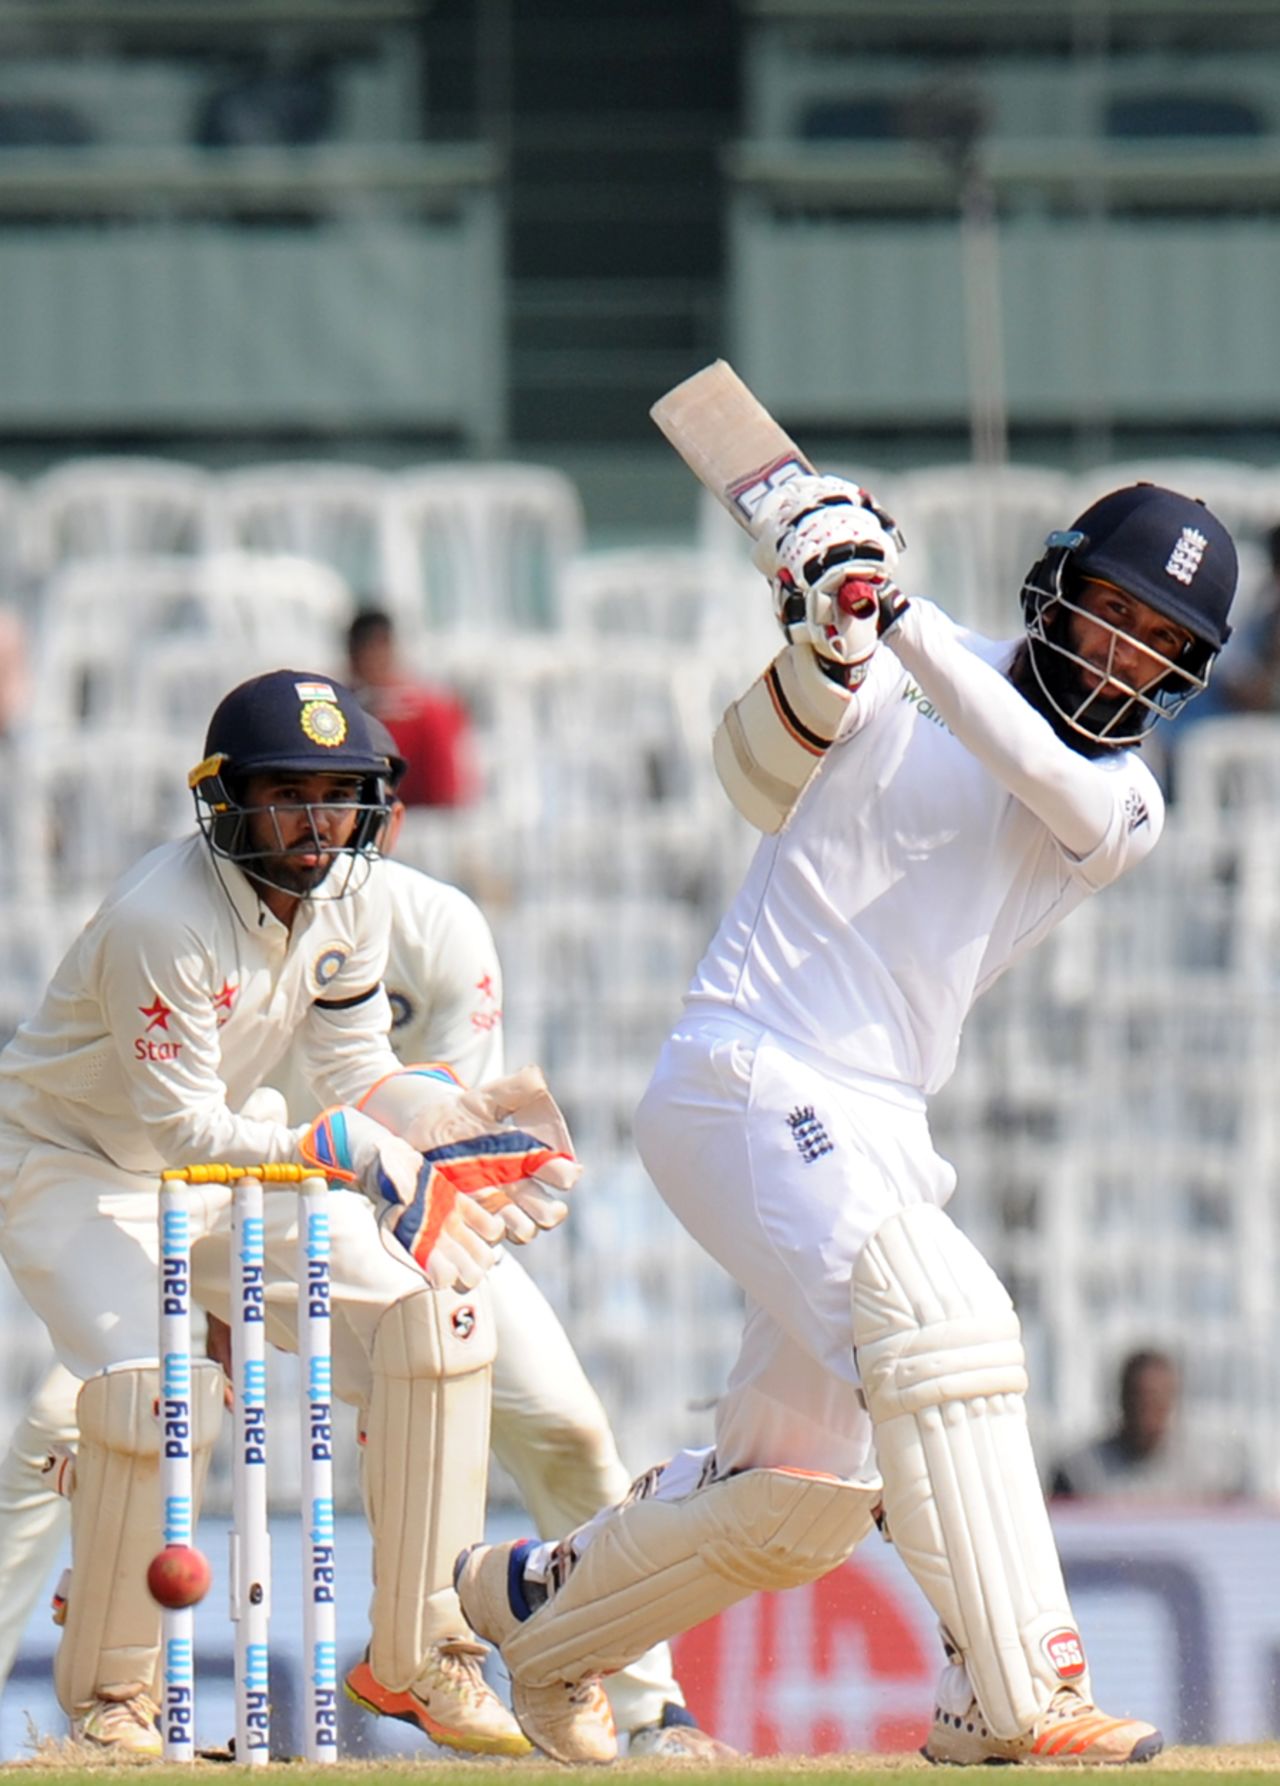 Moeen Ali powers one through the leg side, India v England, 5th Test, Chennai, 2nd day, December 17, 2016